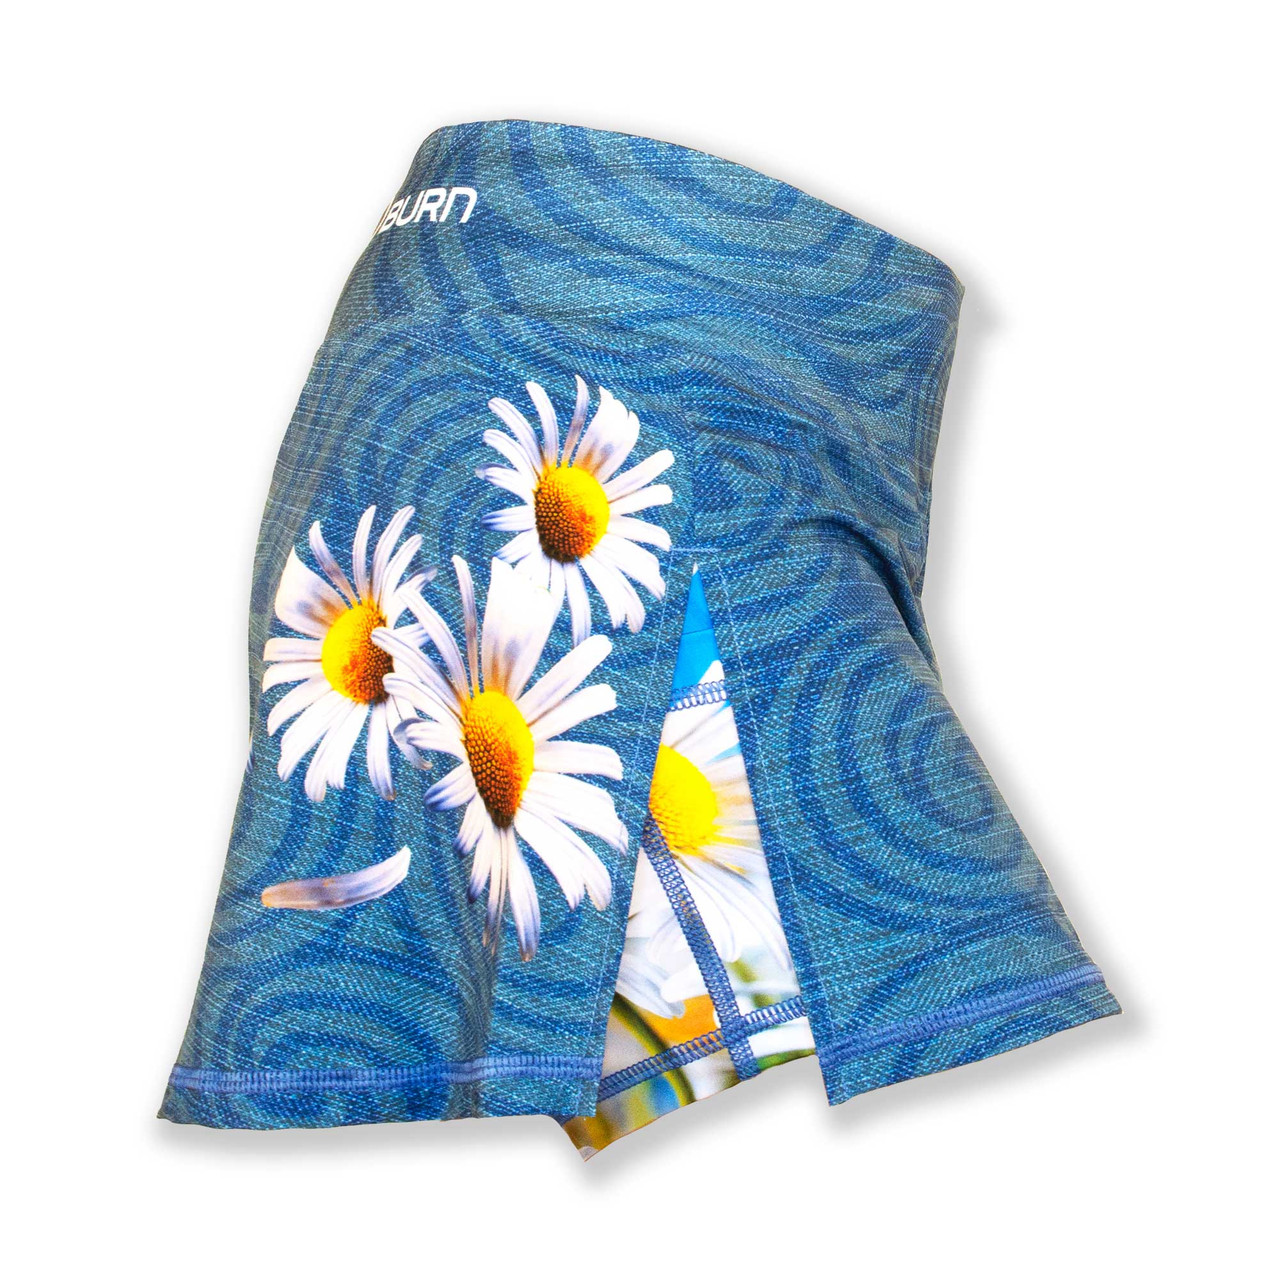 INKnBURN Women's Daisy Sports Skirt or Skort for Running, Gym and Workout